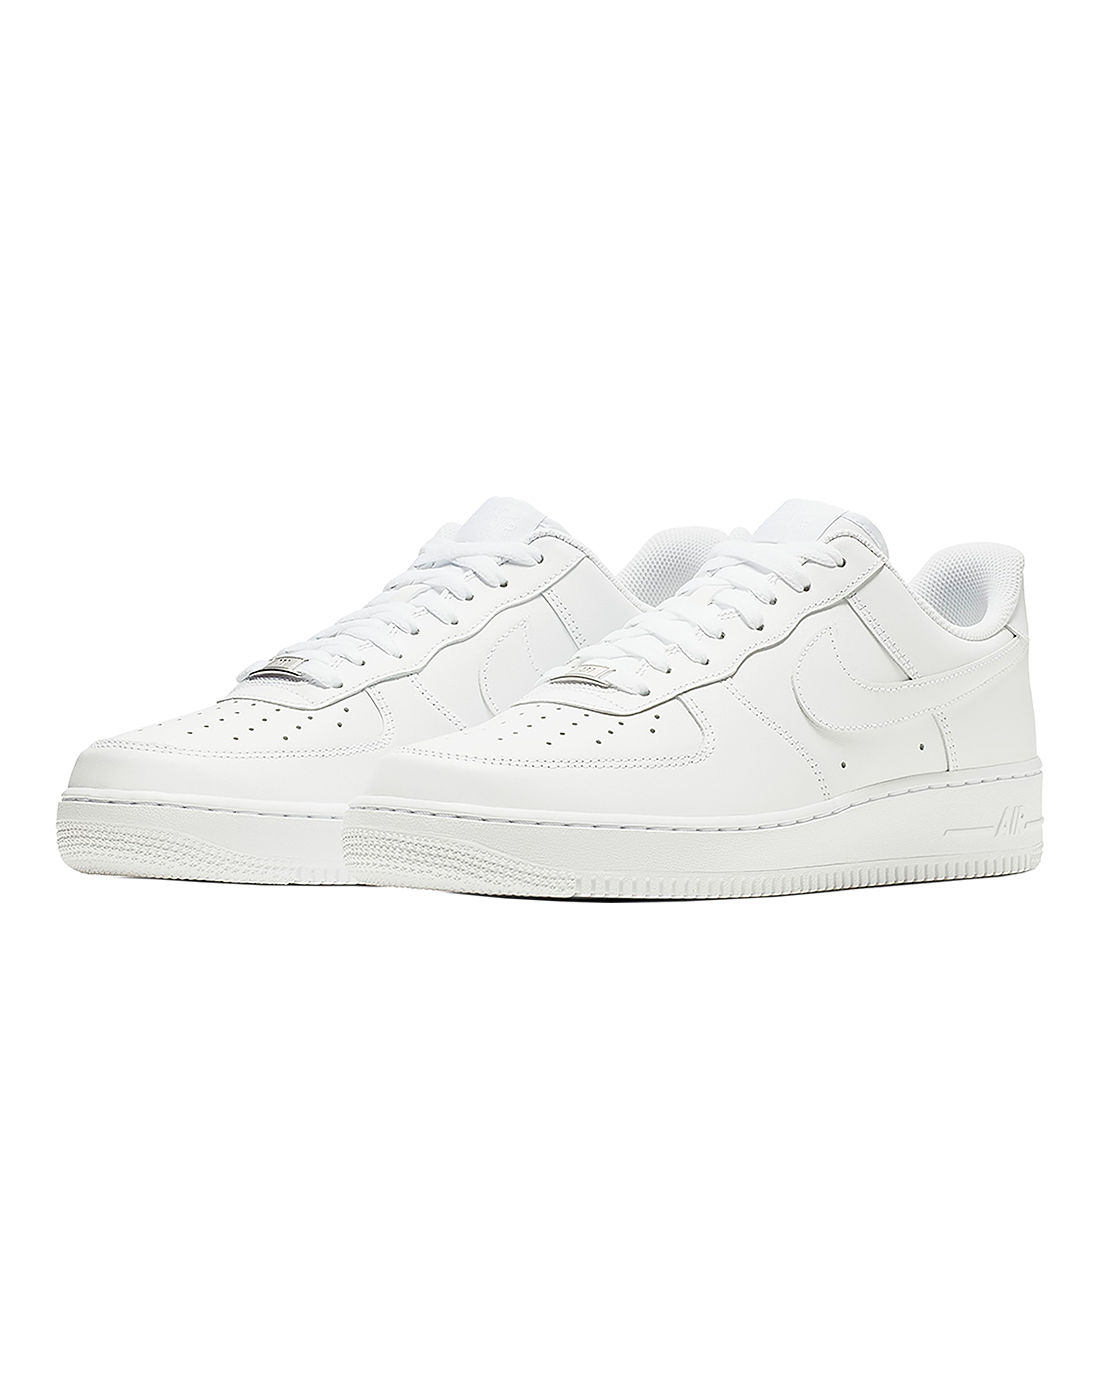 Men's White Nike Air Force 1 | Life Style Sports